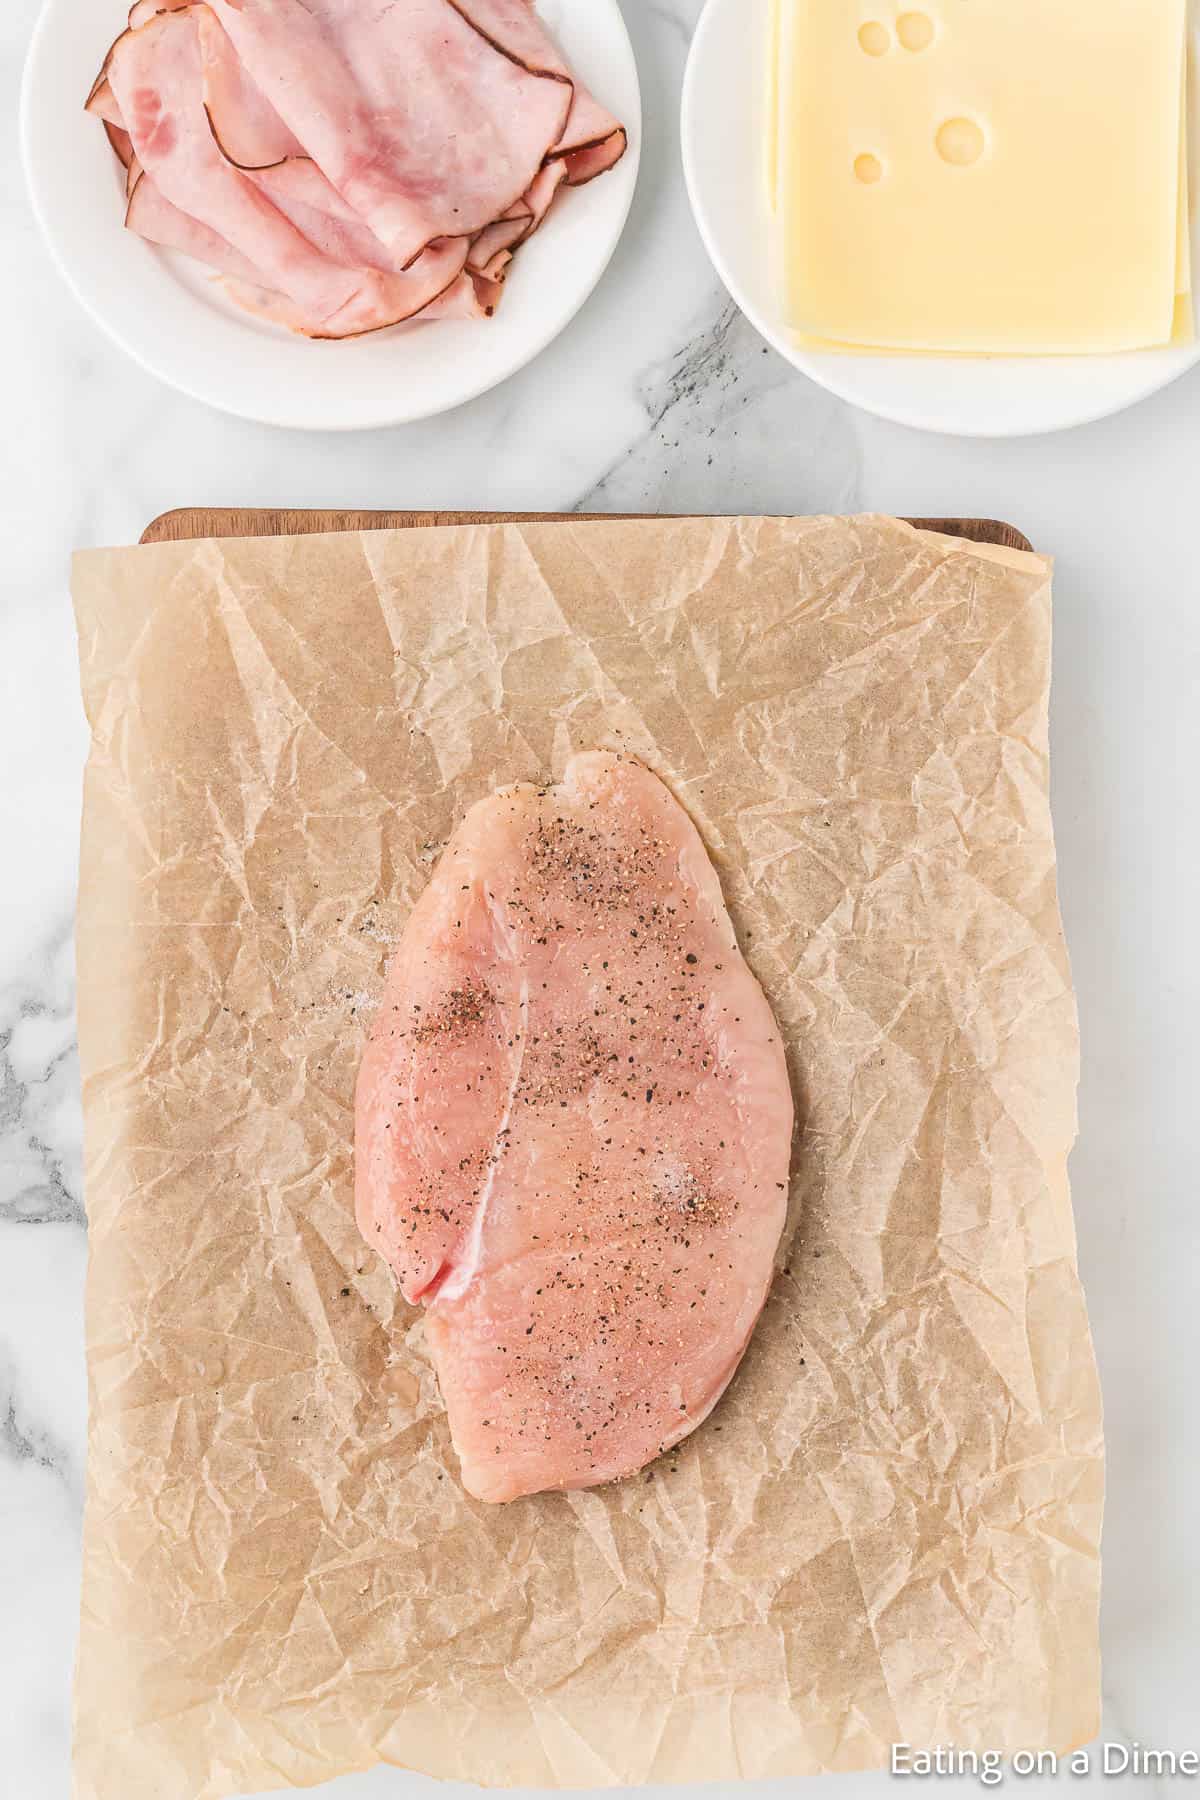 Chicken breast on a piece of parchment paper seasoned with a plate of deli ham and slices of cheese on the side